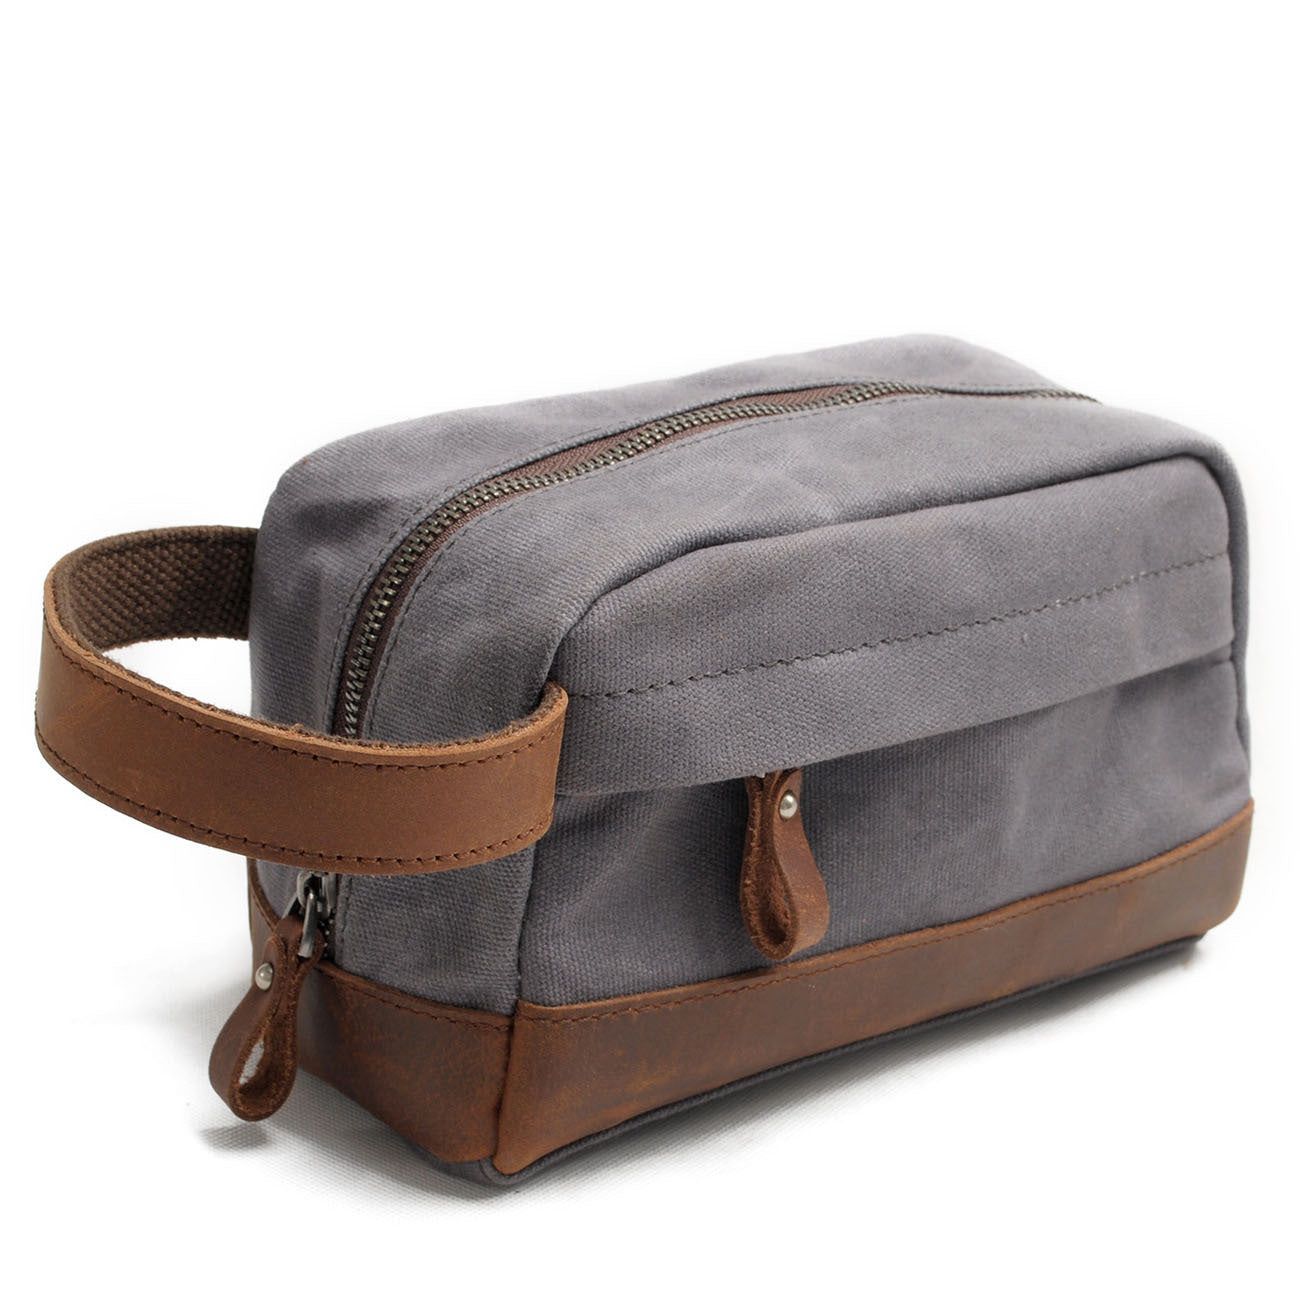 Vintage Waxed Canvas Toiletry Bag for Men 9138-Toiletry Bag-Dark Gray-Free Shipping Leatheretro